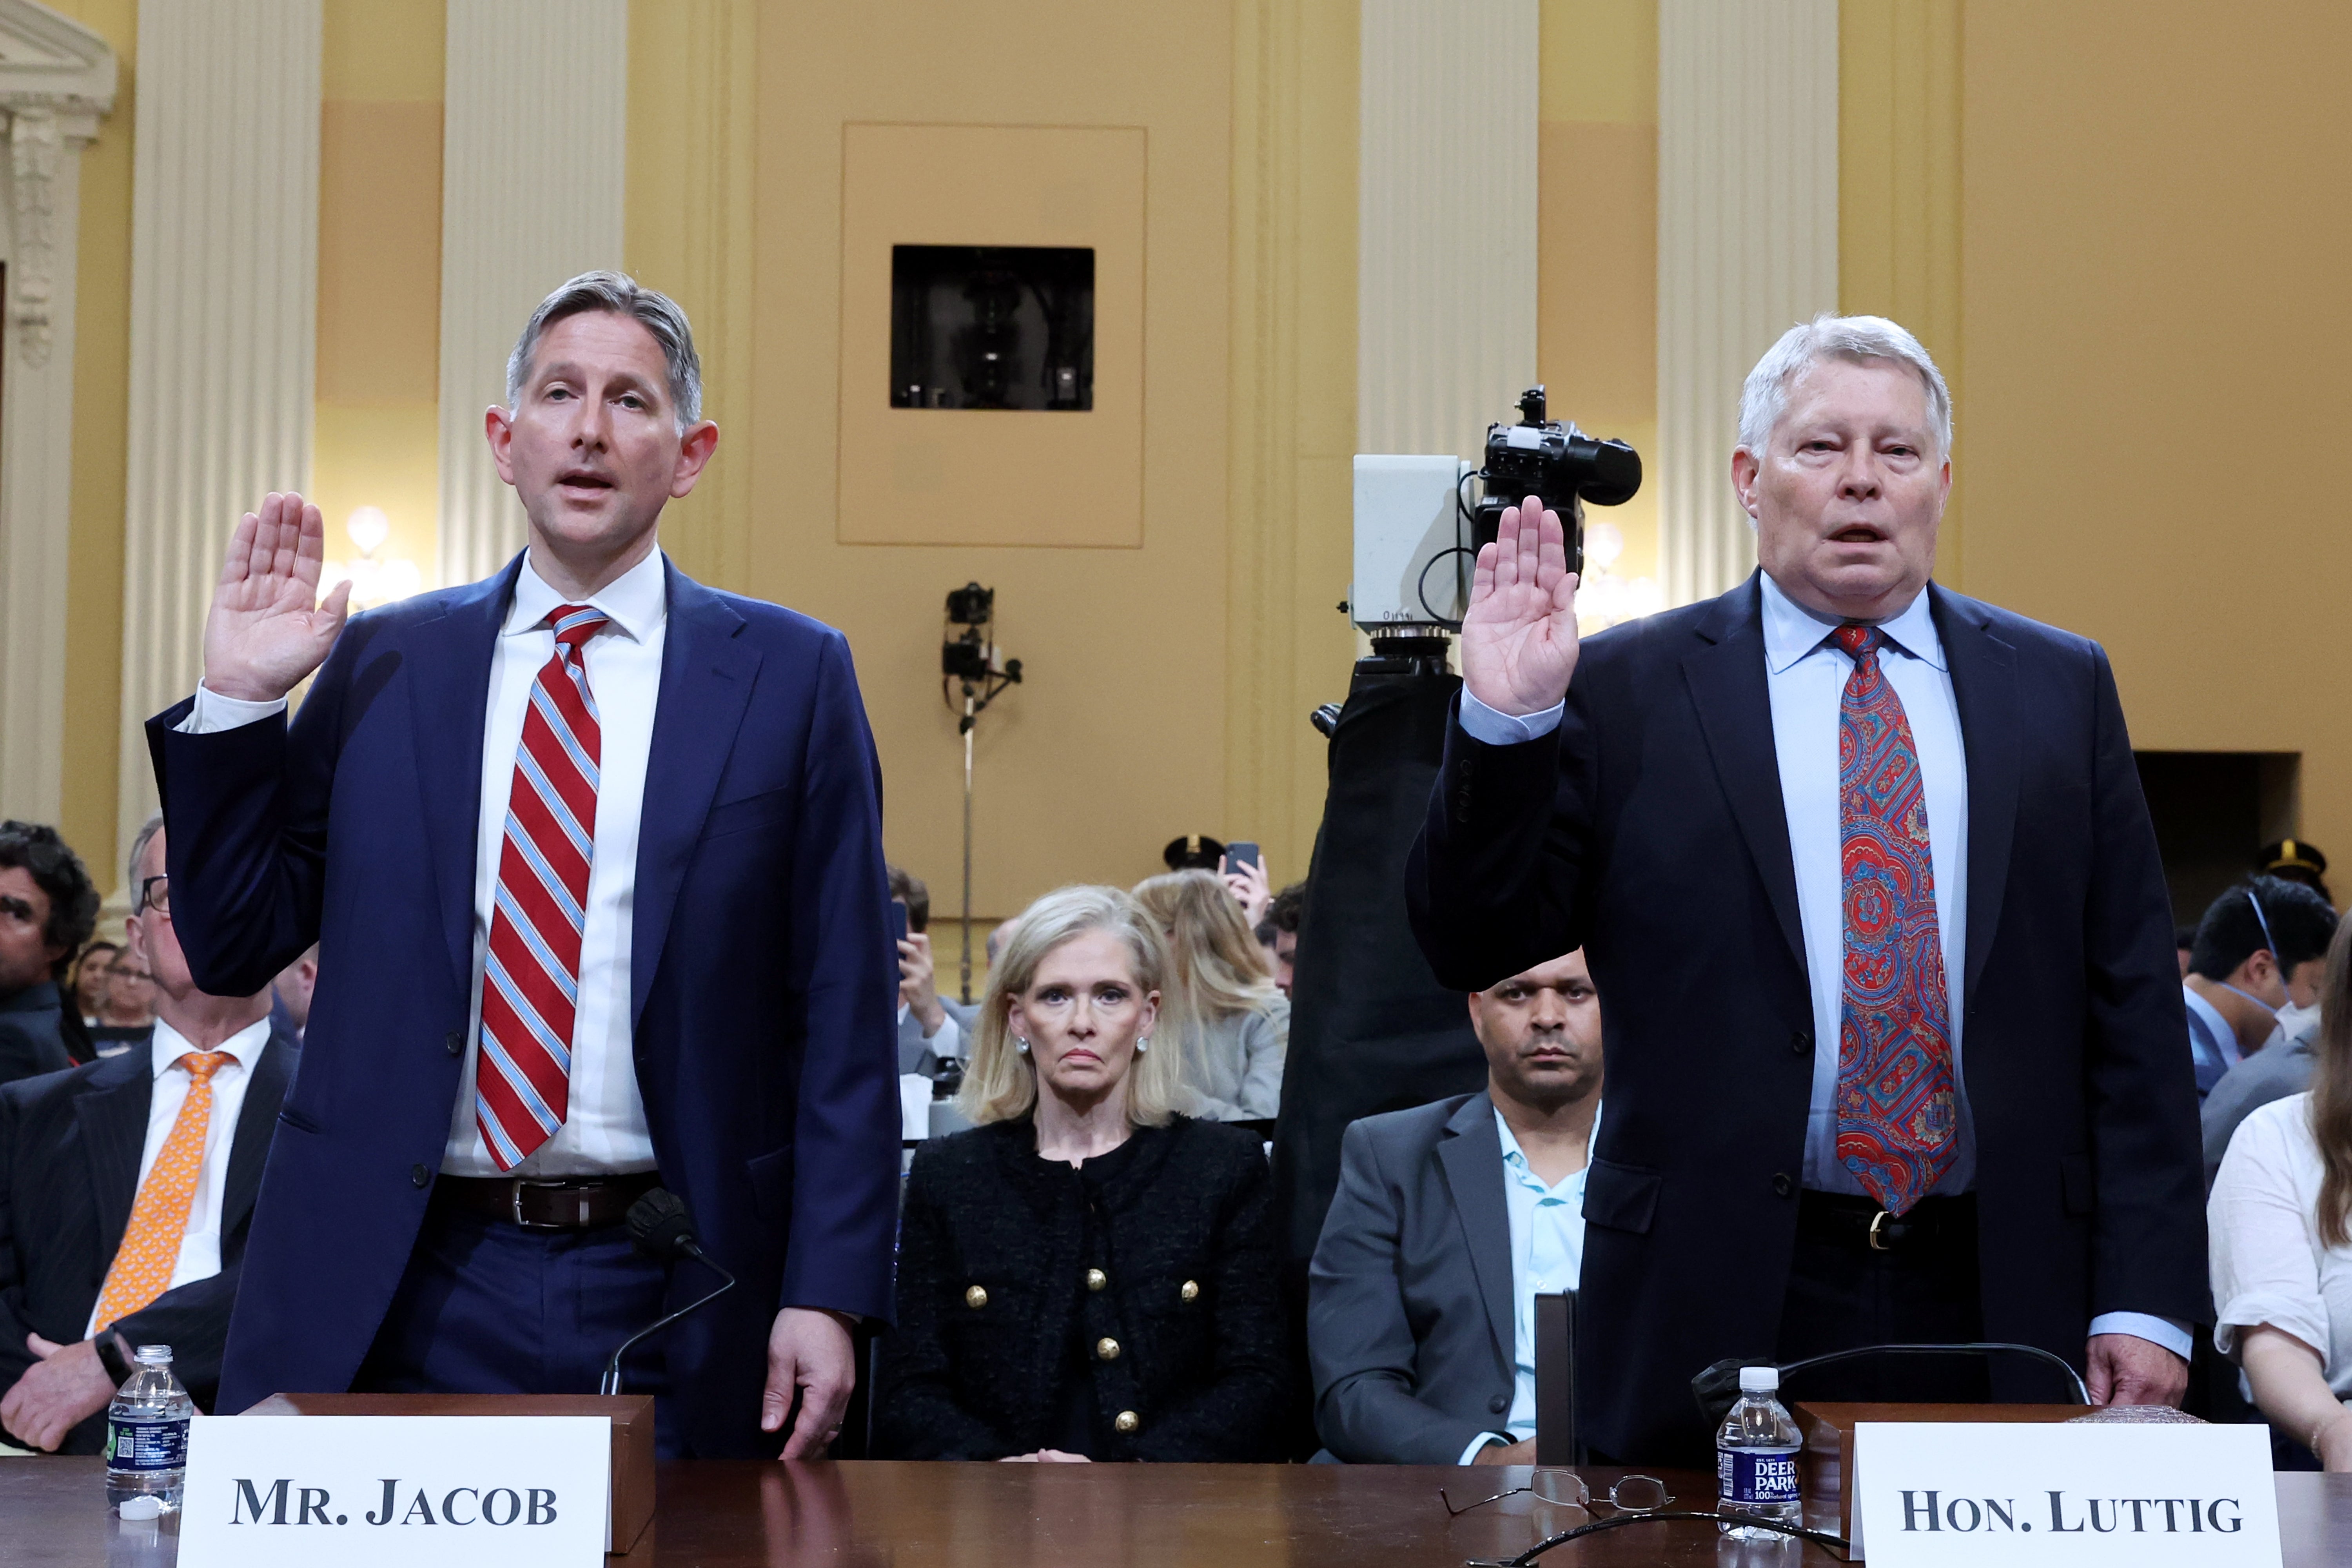 Greg Jacob, former counsel to Vice President Mike Pence, and J. Michael Luttig, retired judge for the U.S. Court of Appeals for the Fourth Circuit and informal advisor to Mike Pence, are sworn in to testify